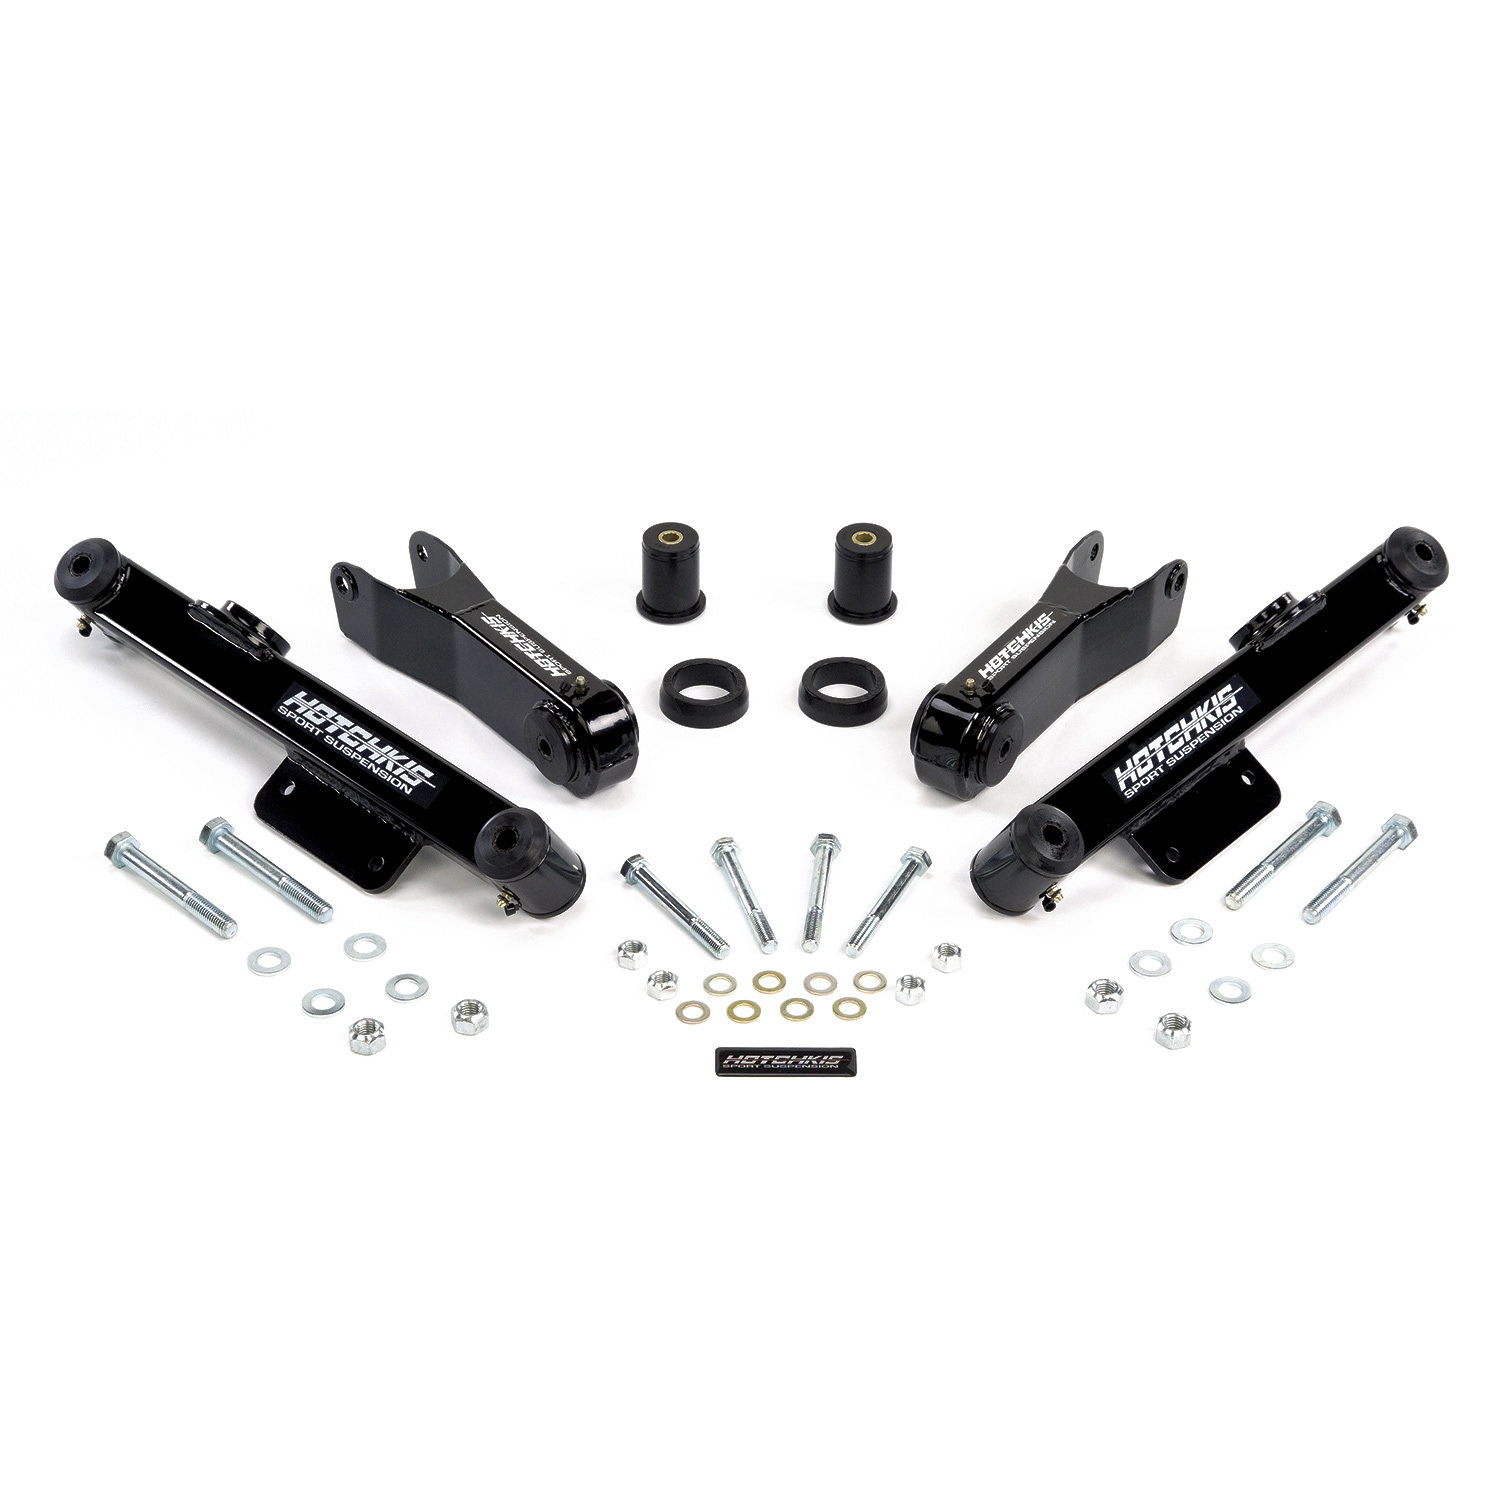 1999-2004 Ford Mustang Hotchkis Rear Suspension Package